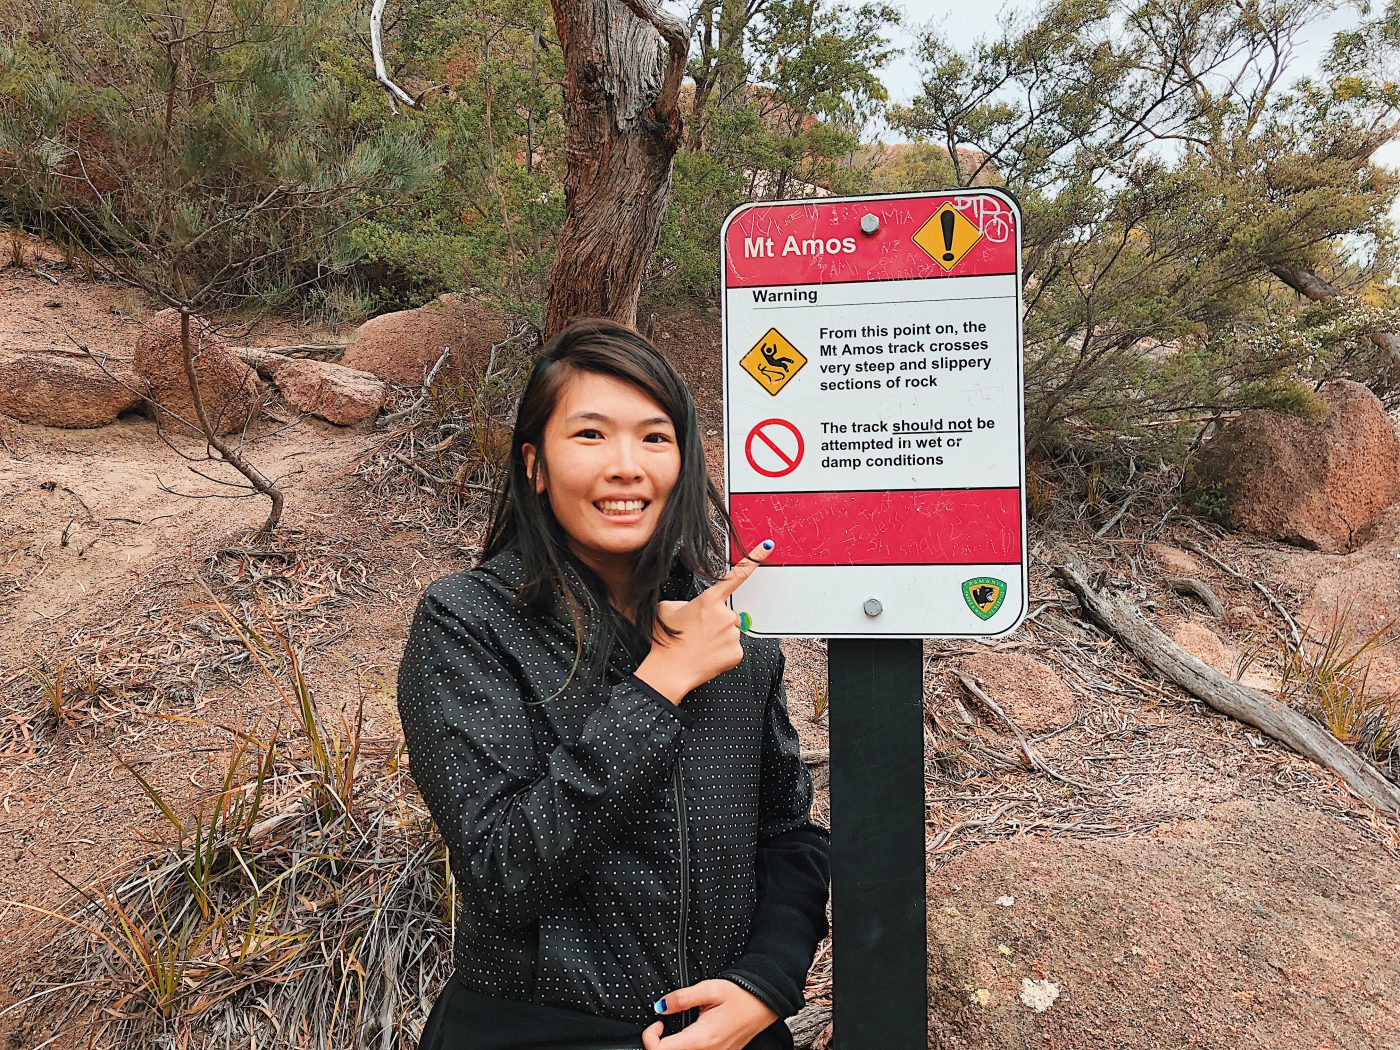 One of the many warning signs we saw on the way up of Mount Amos